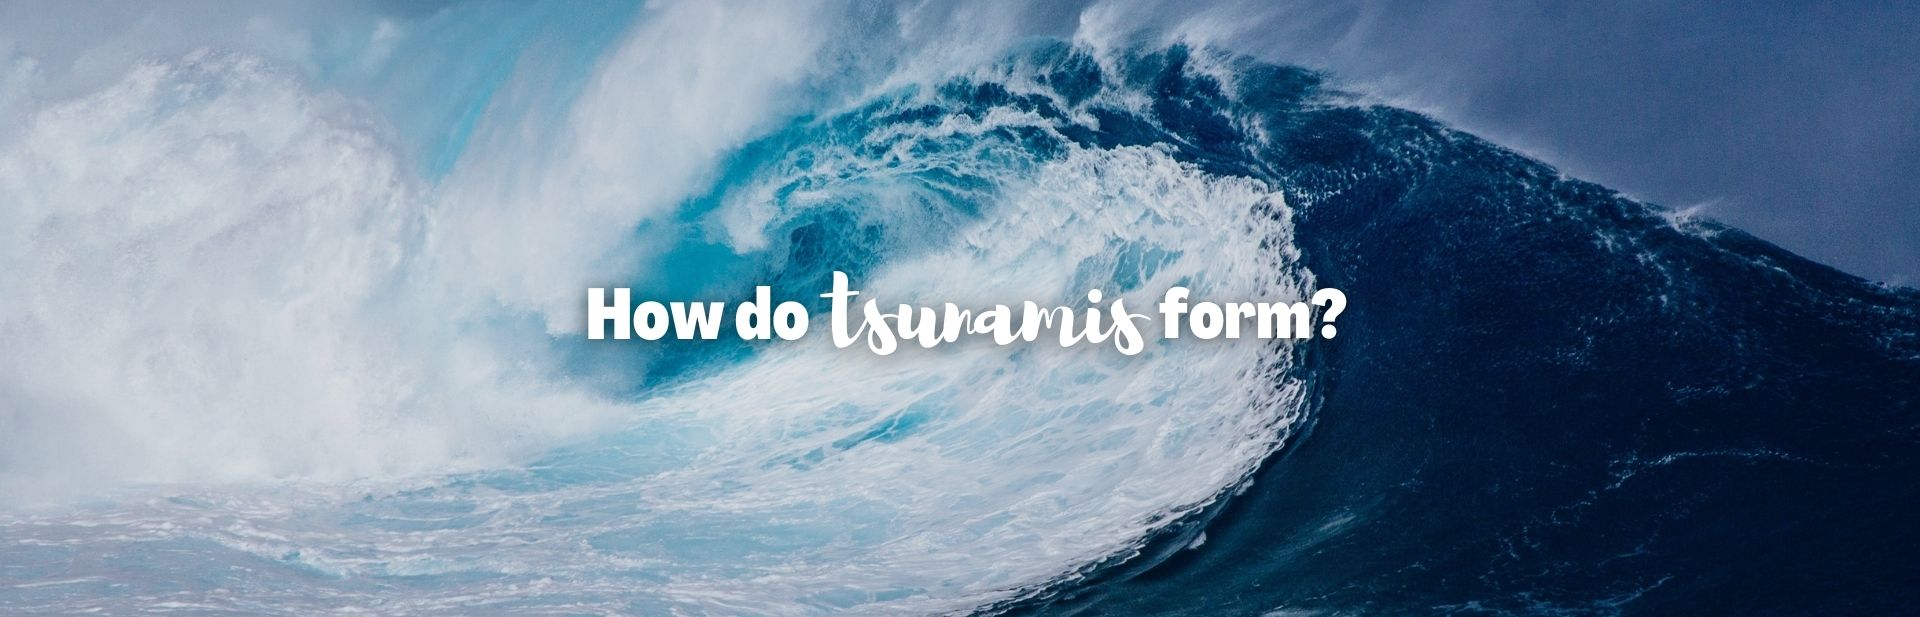 The Science Behind Monster Waves: How Do Tsunamis Form?